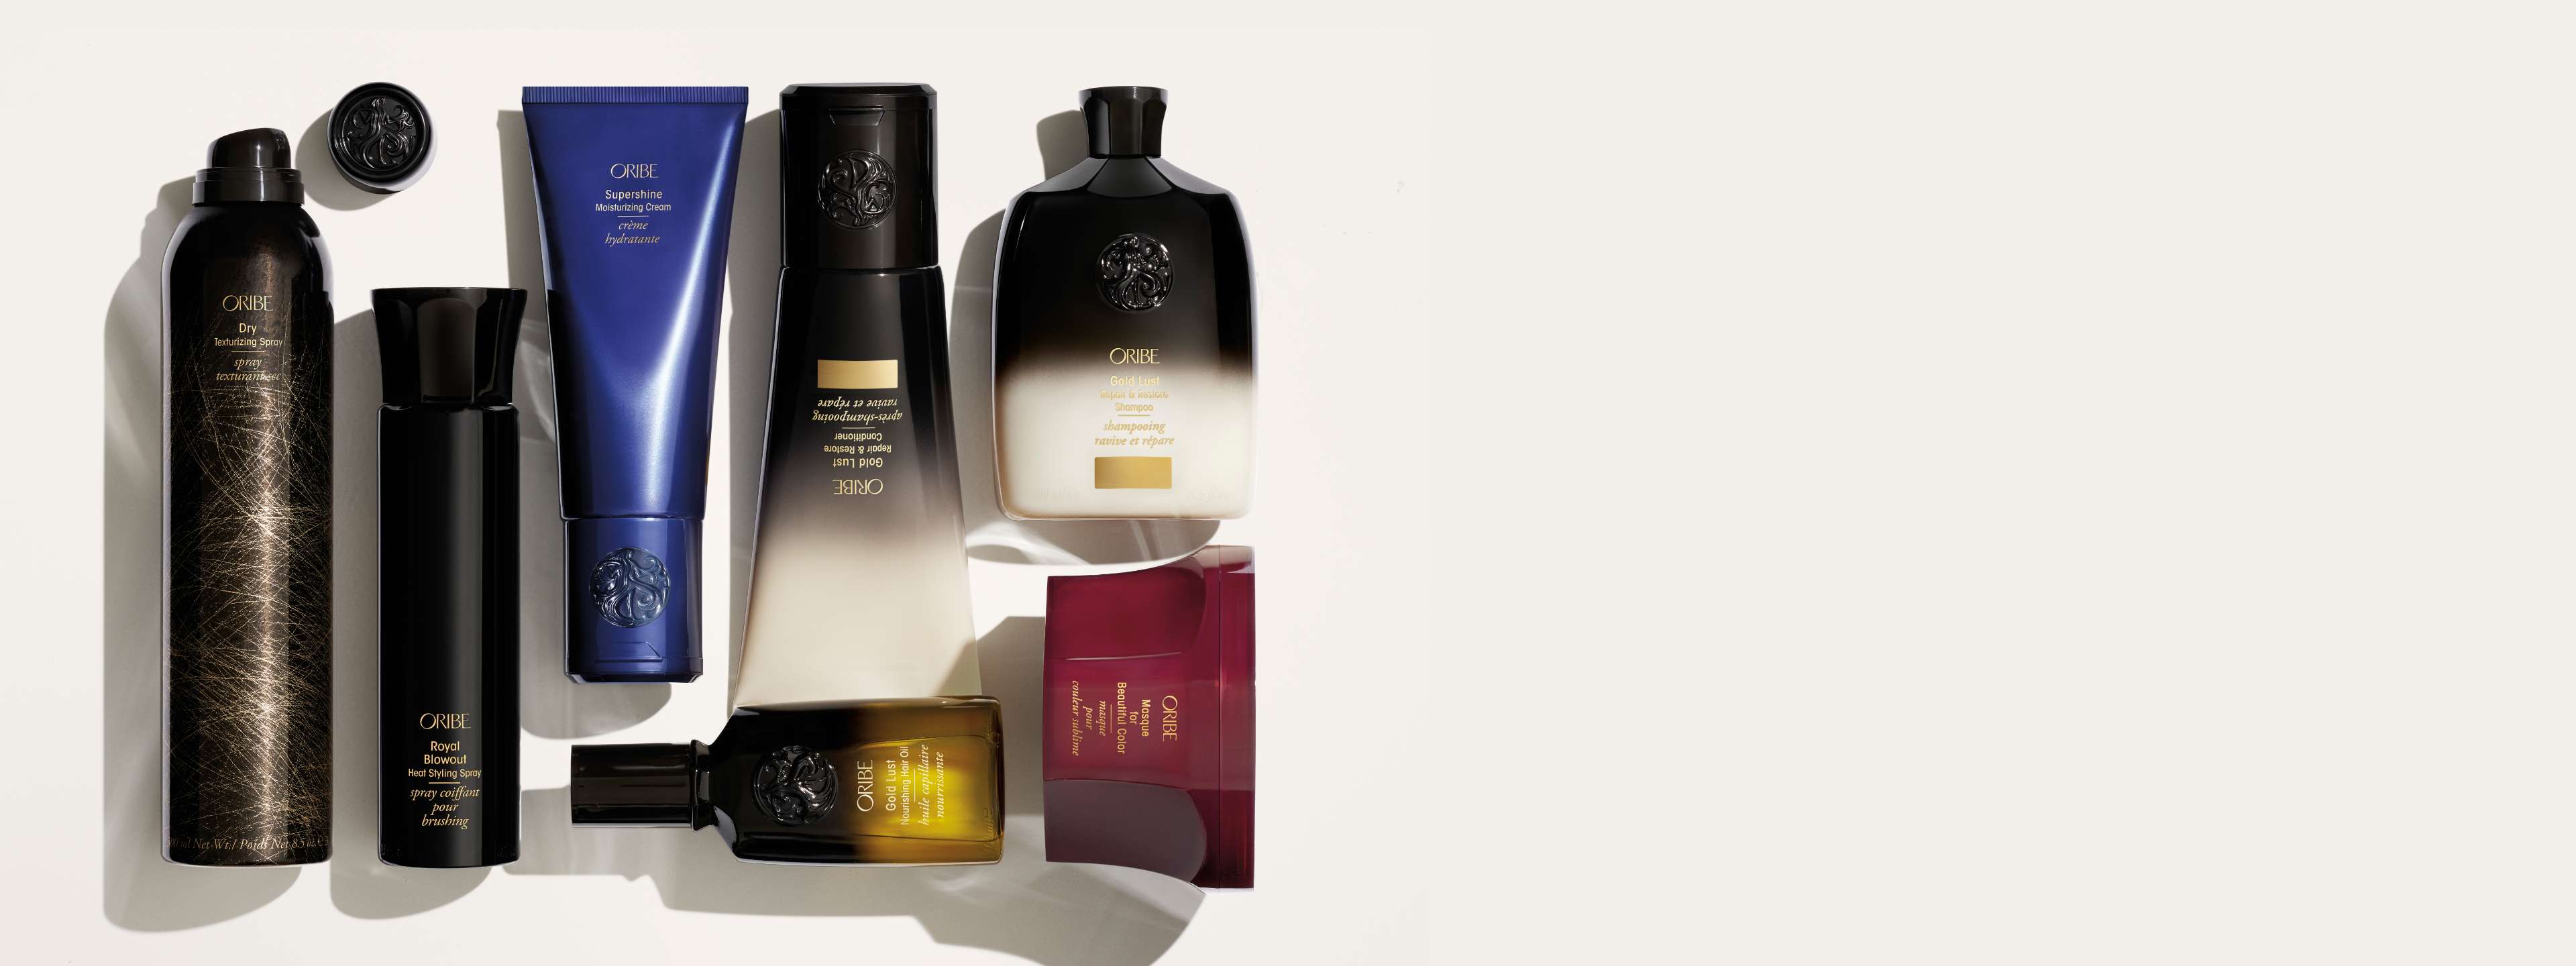 official stockist of Oribe haircare products